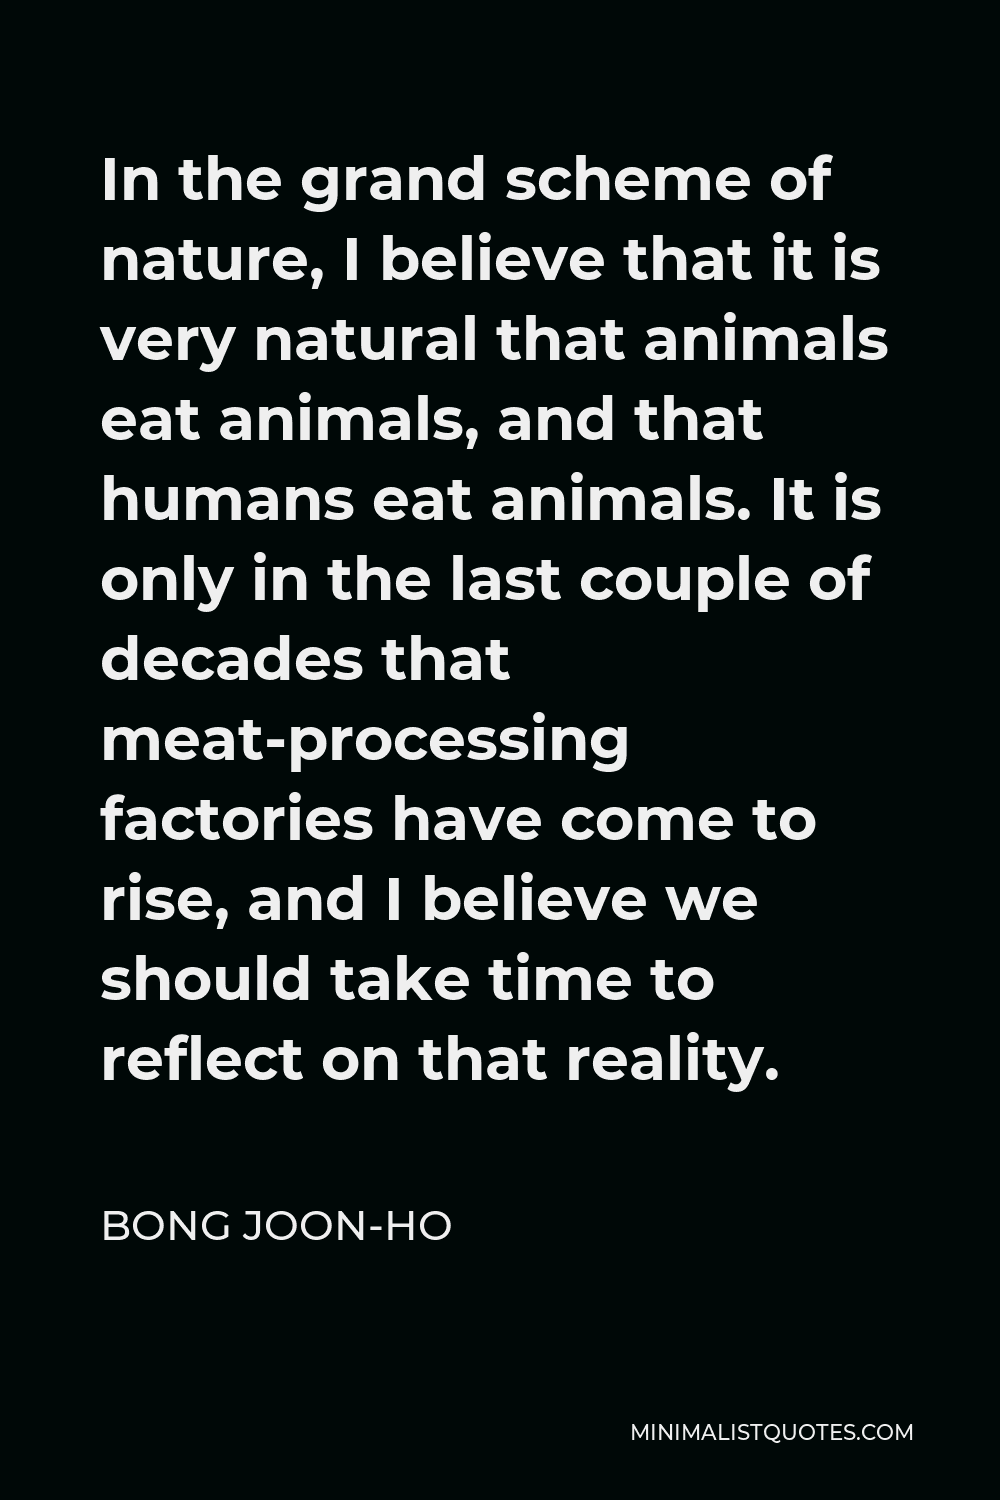 Bong Joon-ho Quote - In the grand scheme of nature, I believe that it is very natural that animals eat animals, and that humans eat animals. It is only in the last couple of decades that meat-processing factories have come to rise, and I believe we should take time to reflect on that reality.